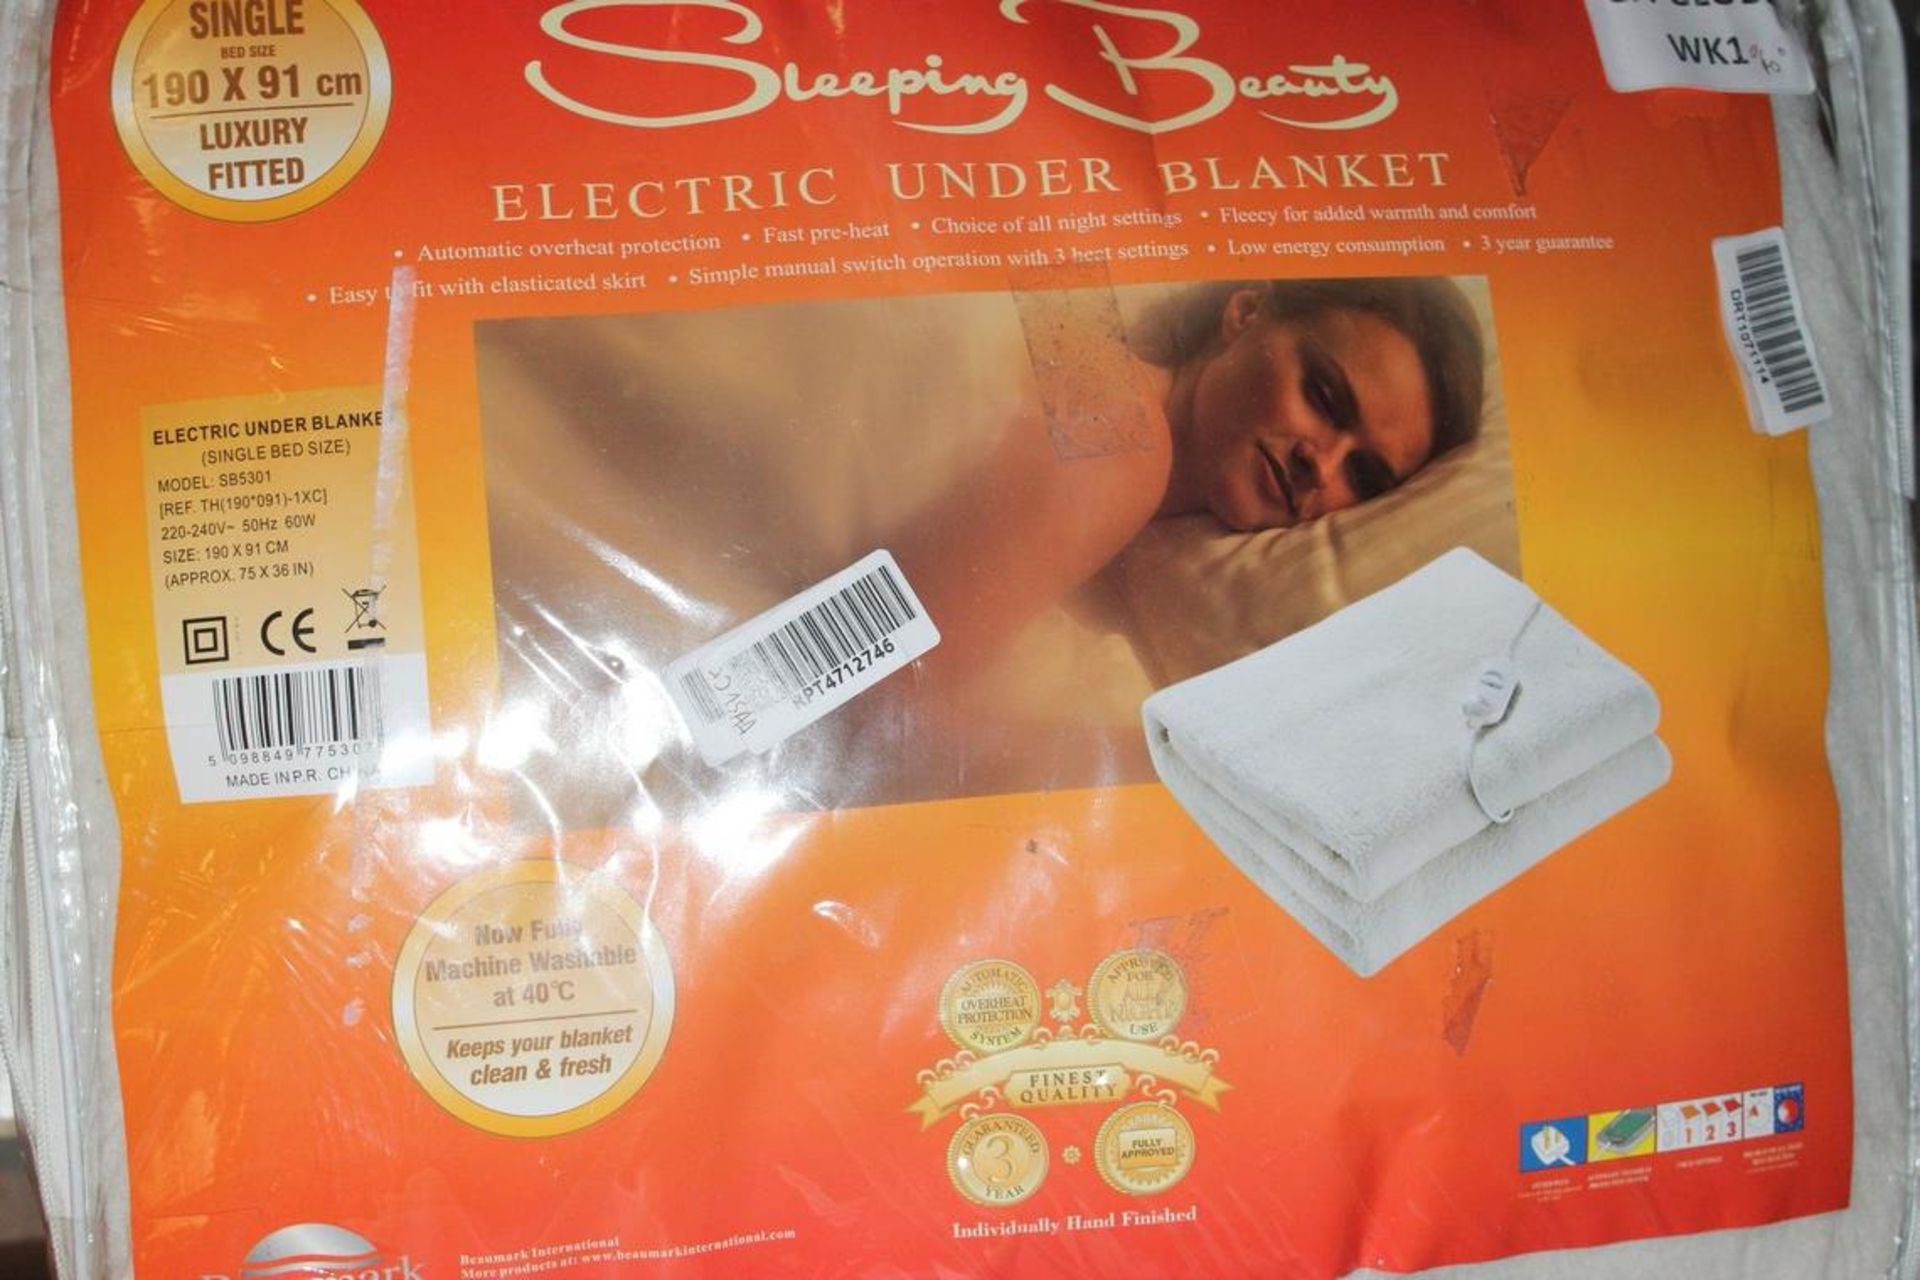 Lot To Contain 2 Sleeping Beauty Electrically Heated Under Blankets Combined RRP £110 (Untested